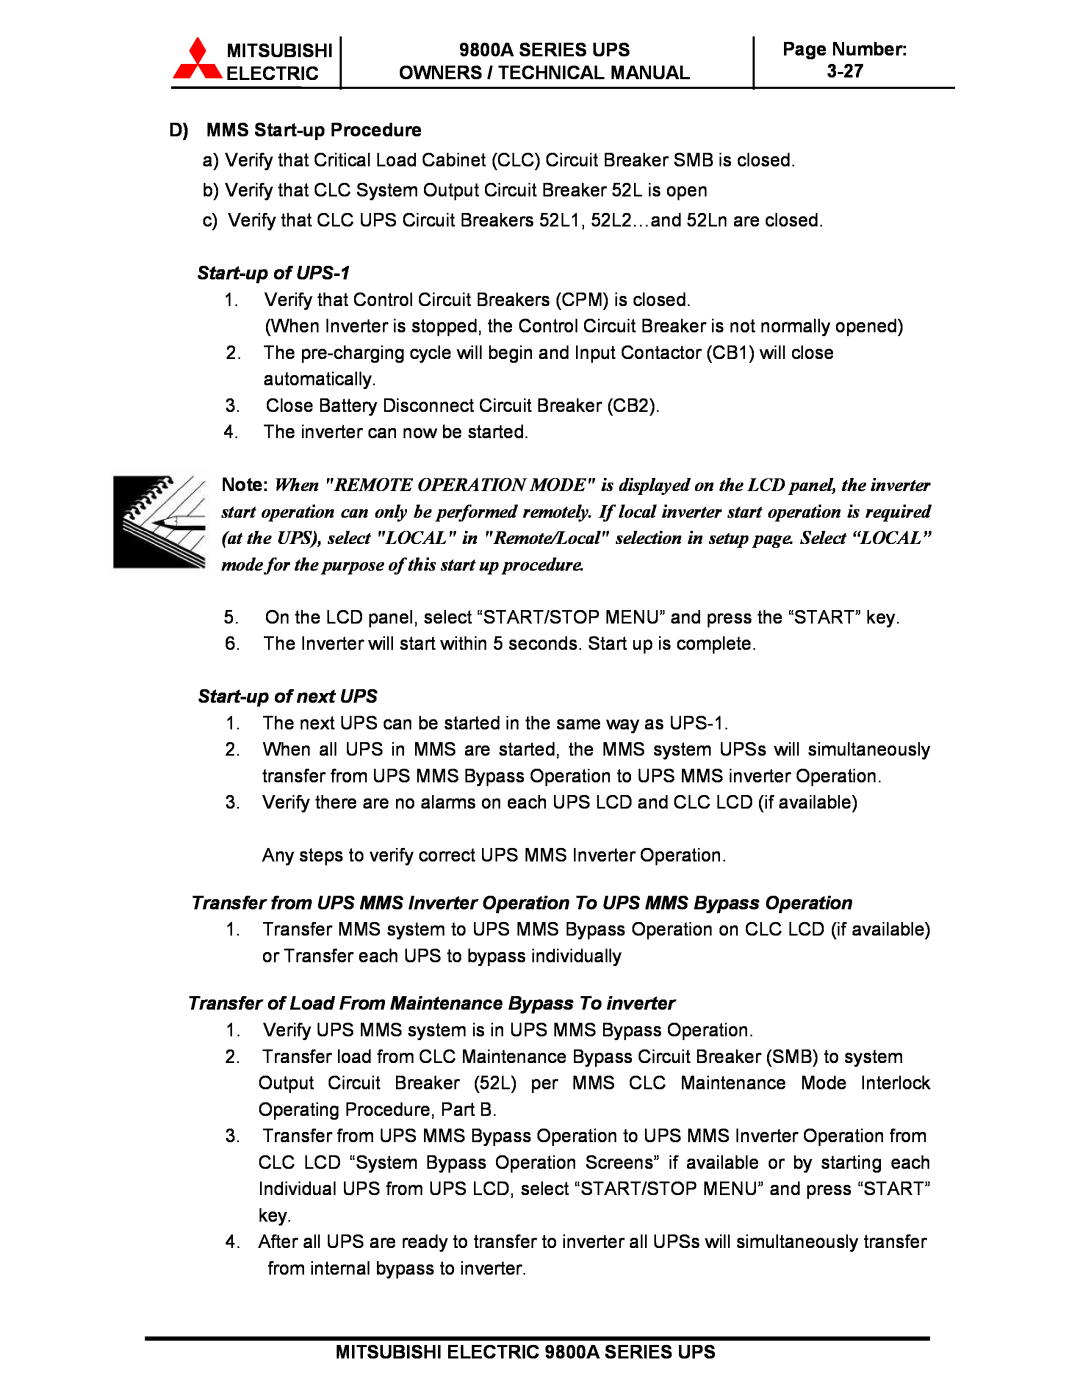 Mitsubishi 9800A Series technical manual Mitsubishi Electric, 9800A SERIES UPS OWNERS / TECHNICAL MANUAL, Page Number 3-27 